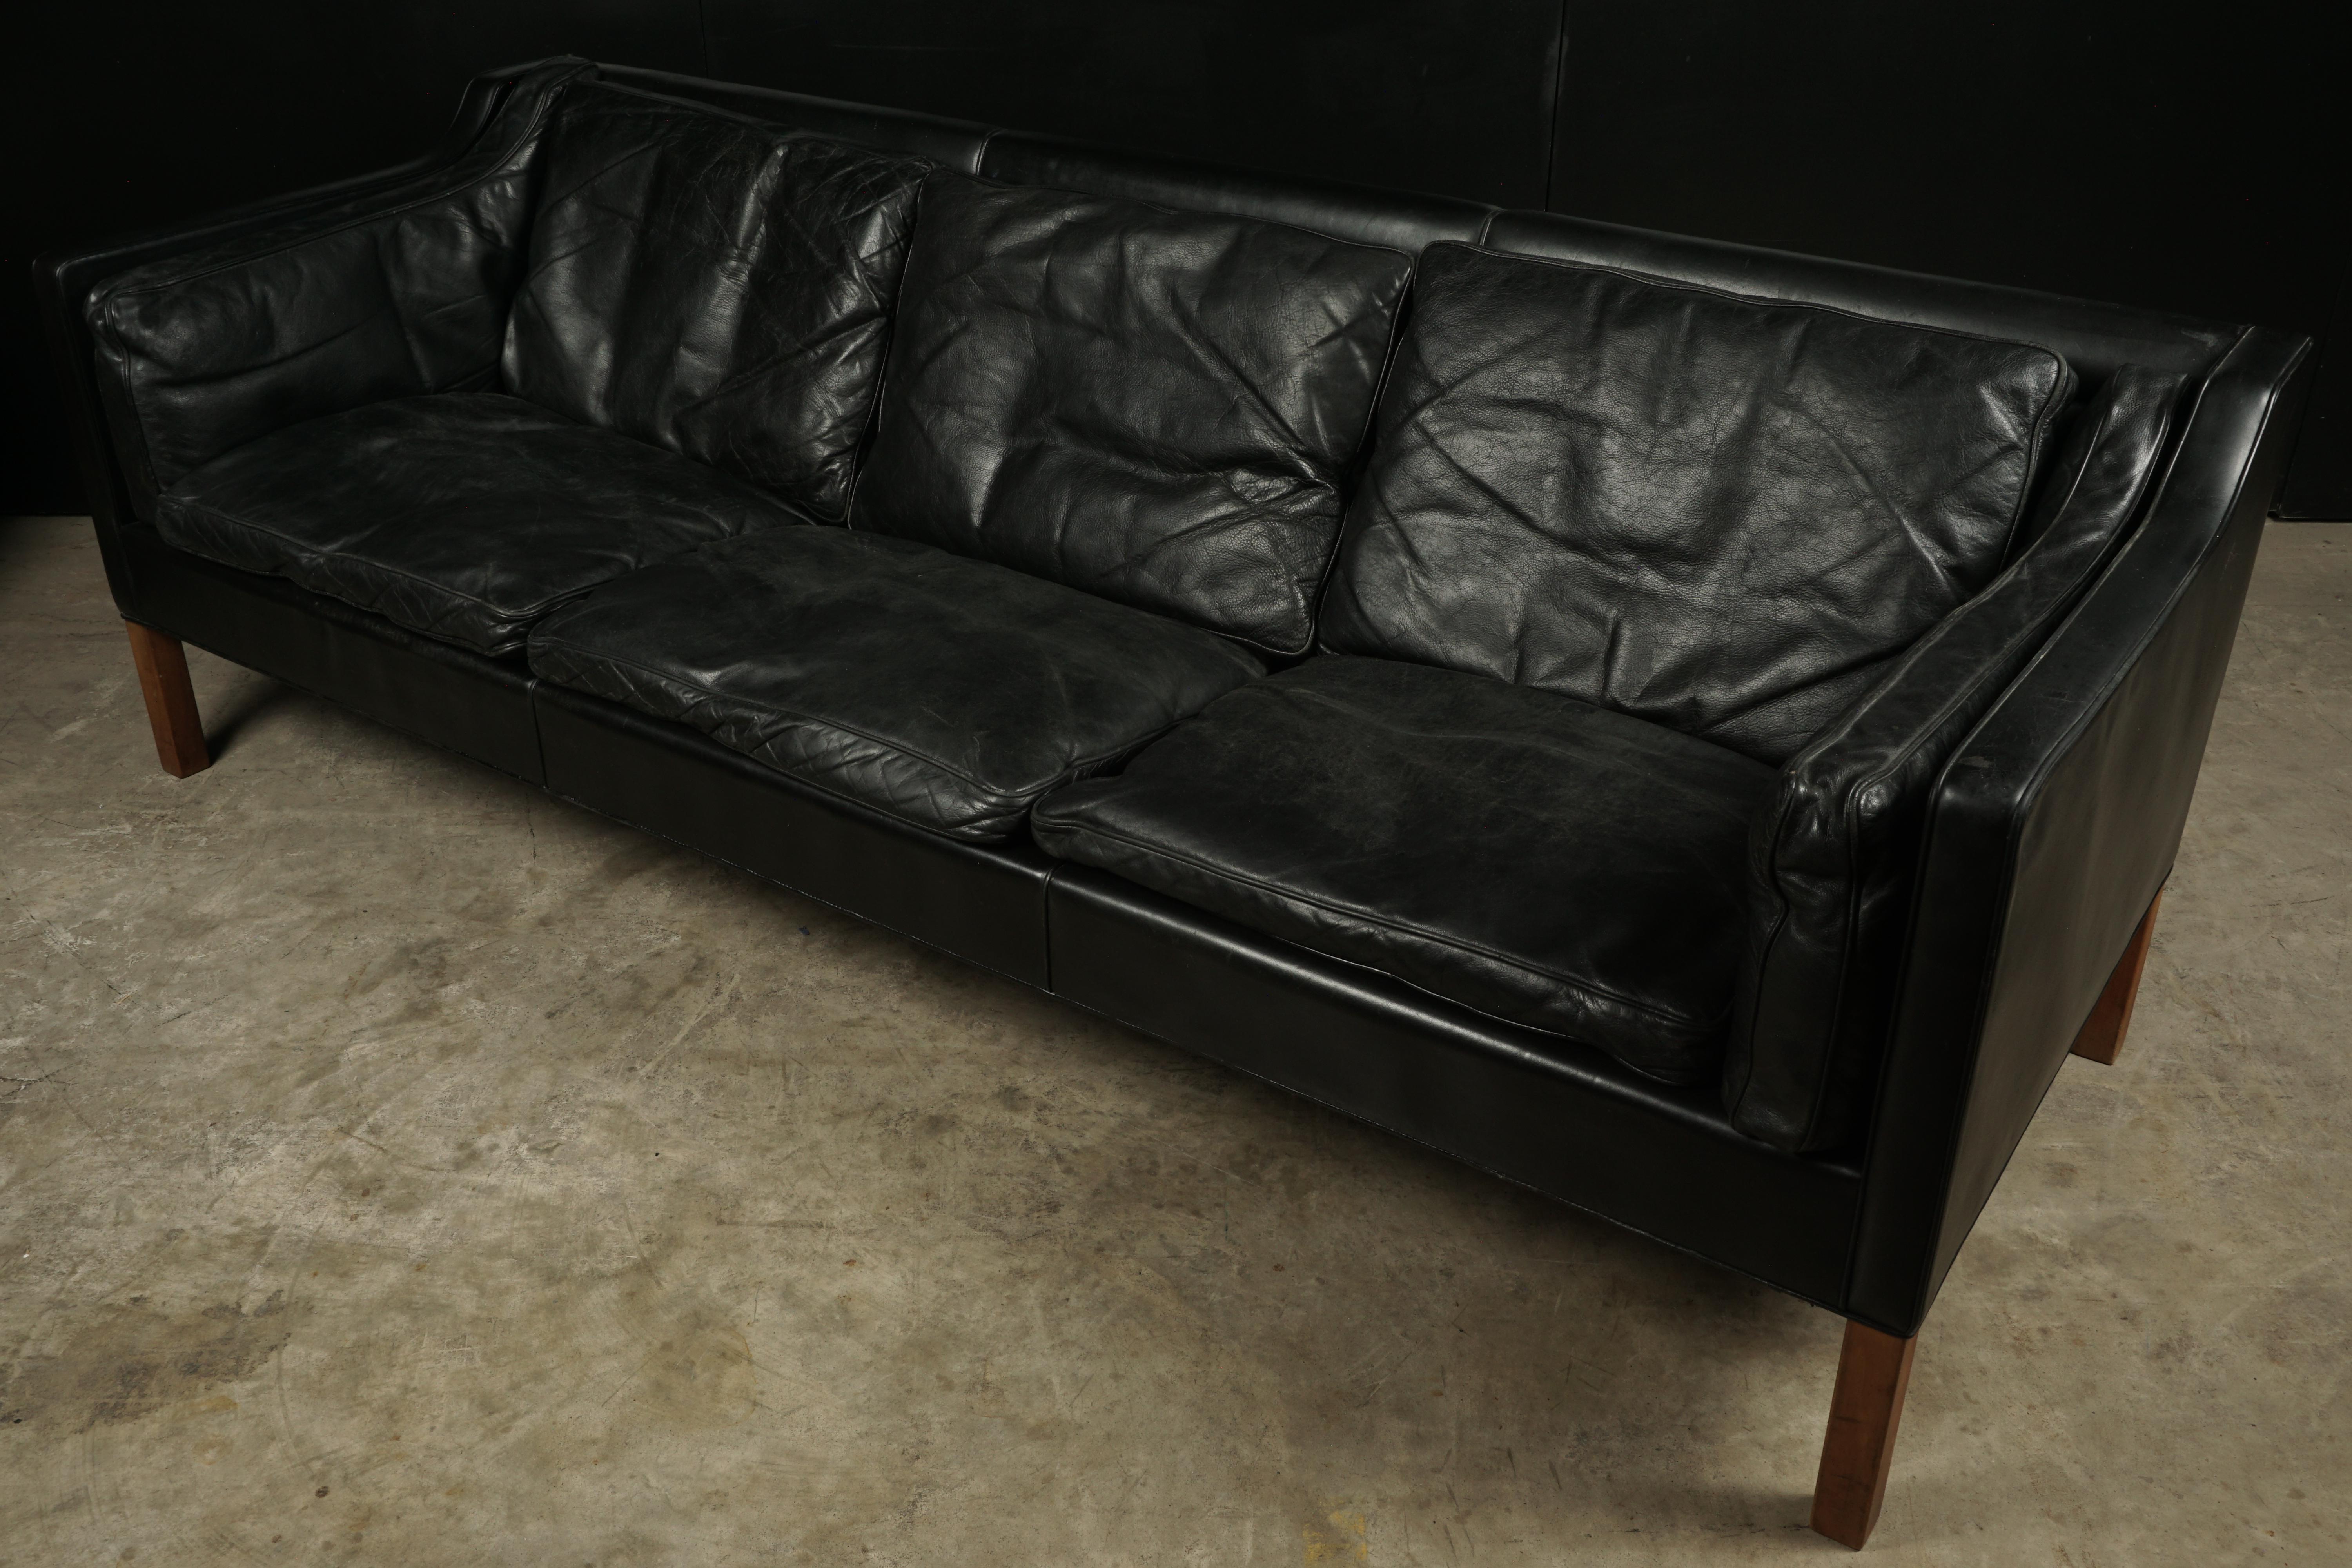 Midcentury sofa designed by Børge Mogensen, model 2213. Original black leather upholstery, with down filled cushions. Nice wear and patina.